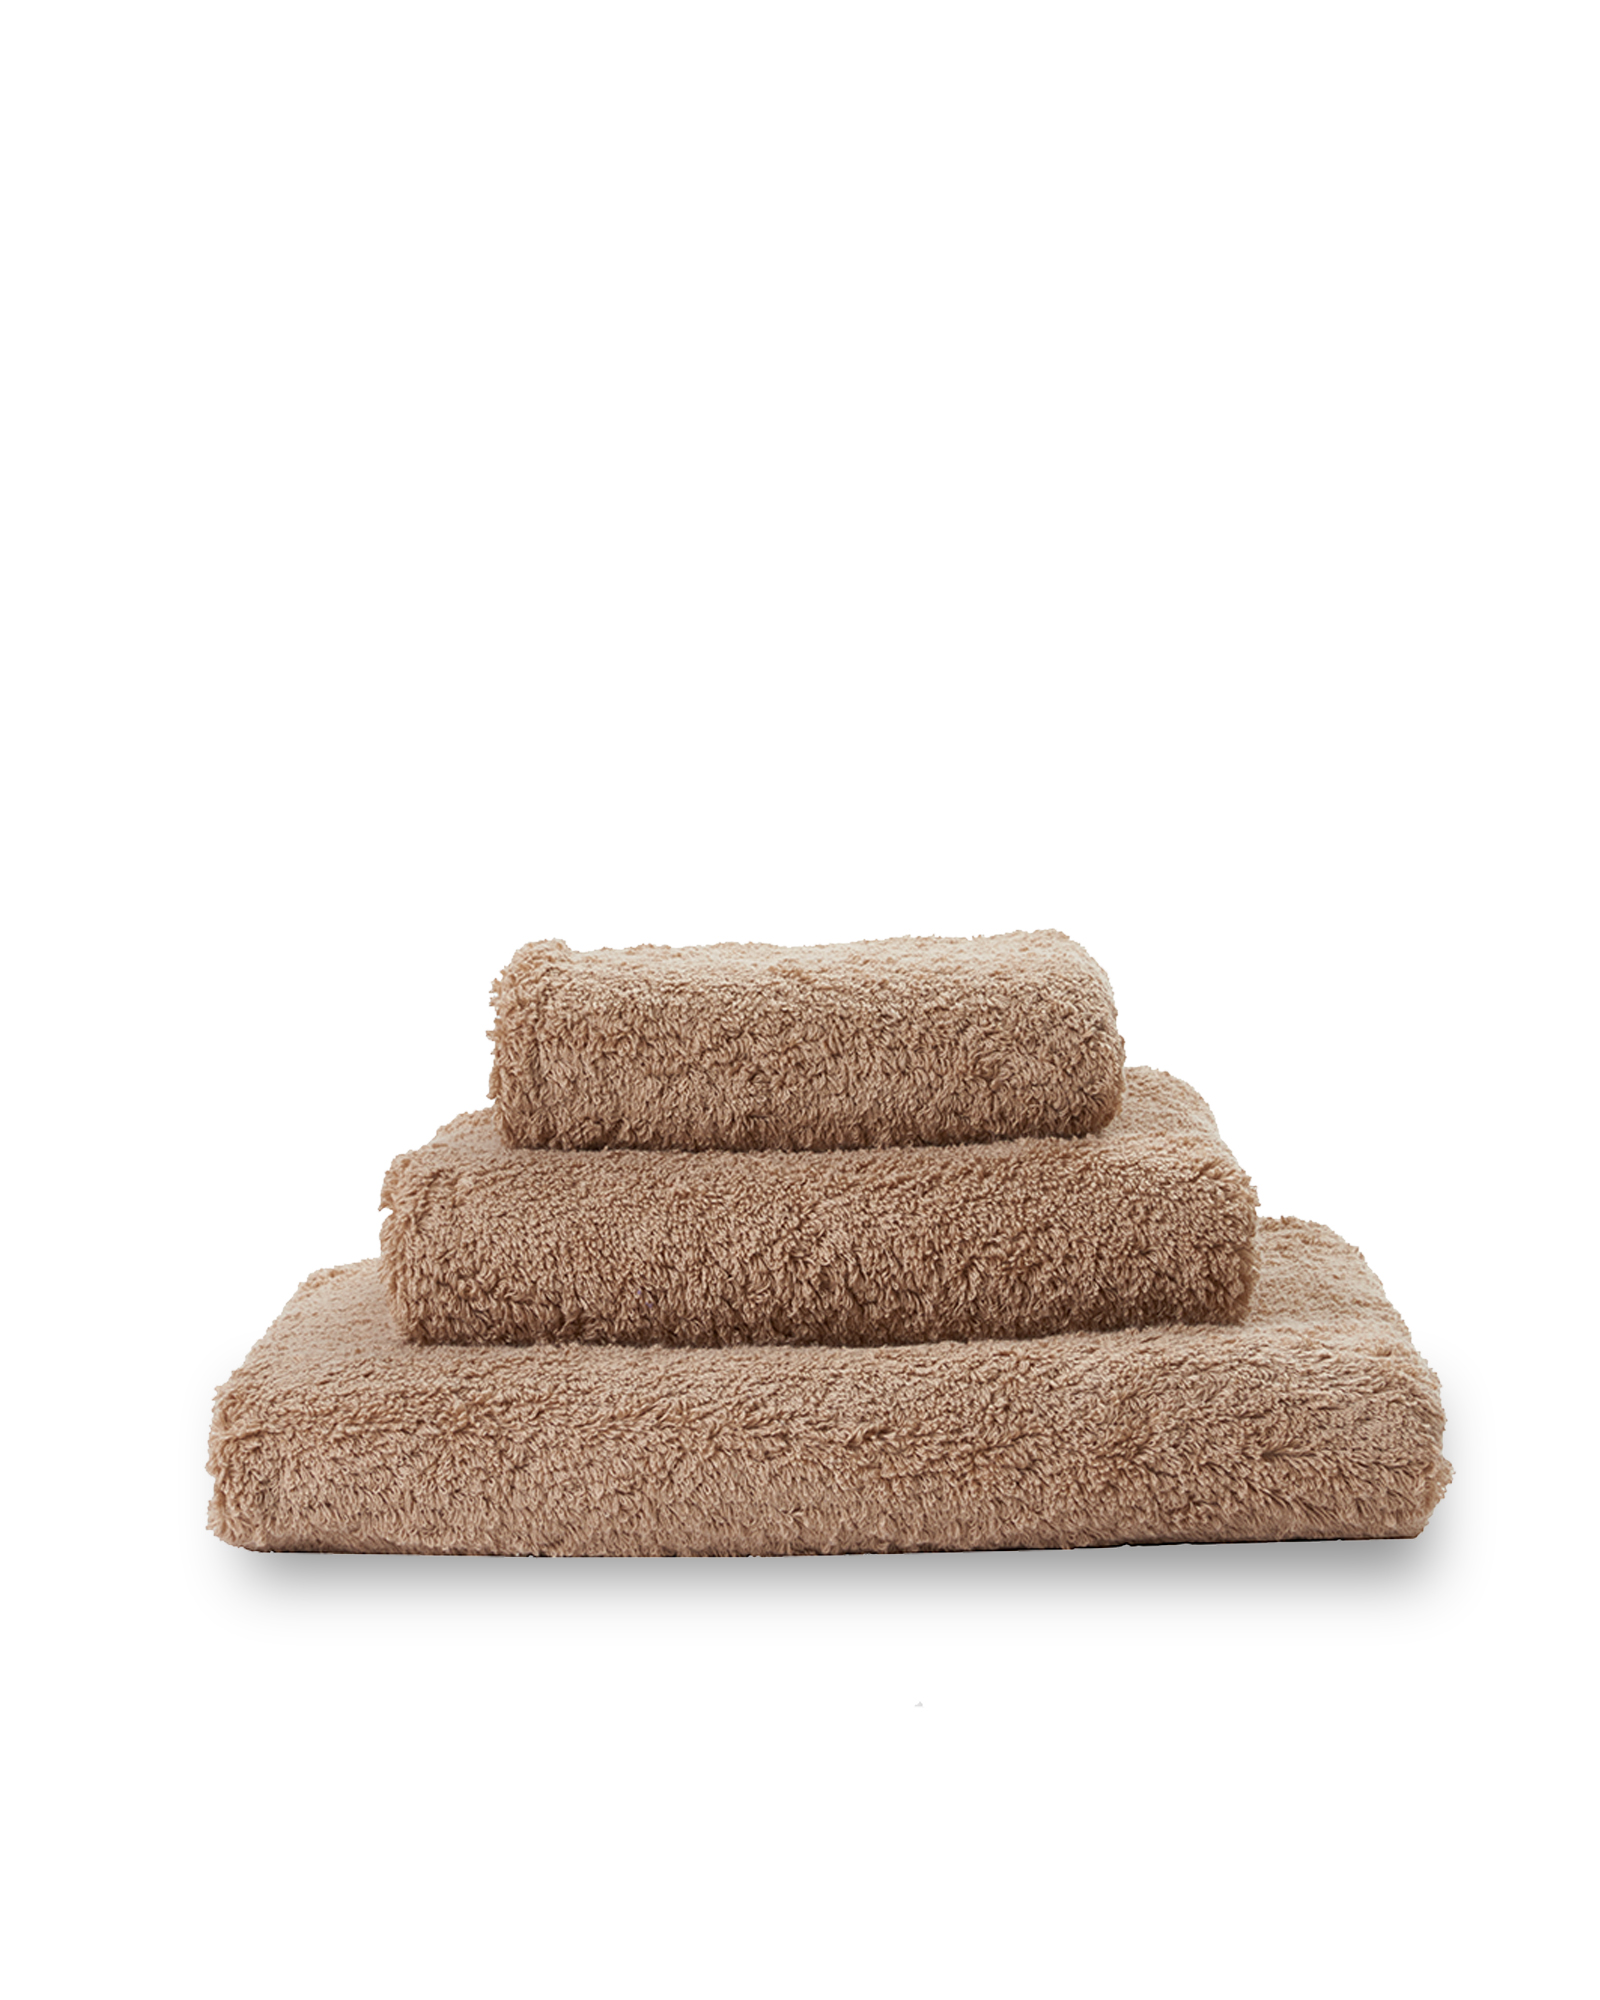 Abyss & Habidecor - Waslapje SUPER PILE 711 Taupe - 30x30 cm - 711 Taupe 